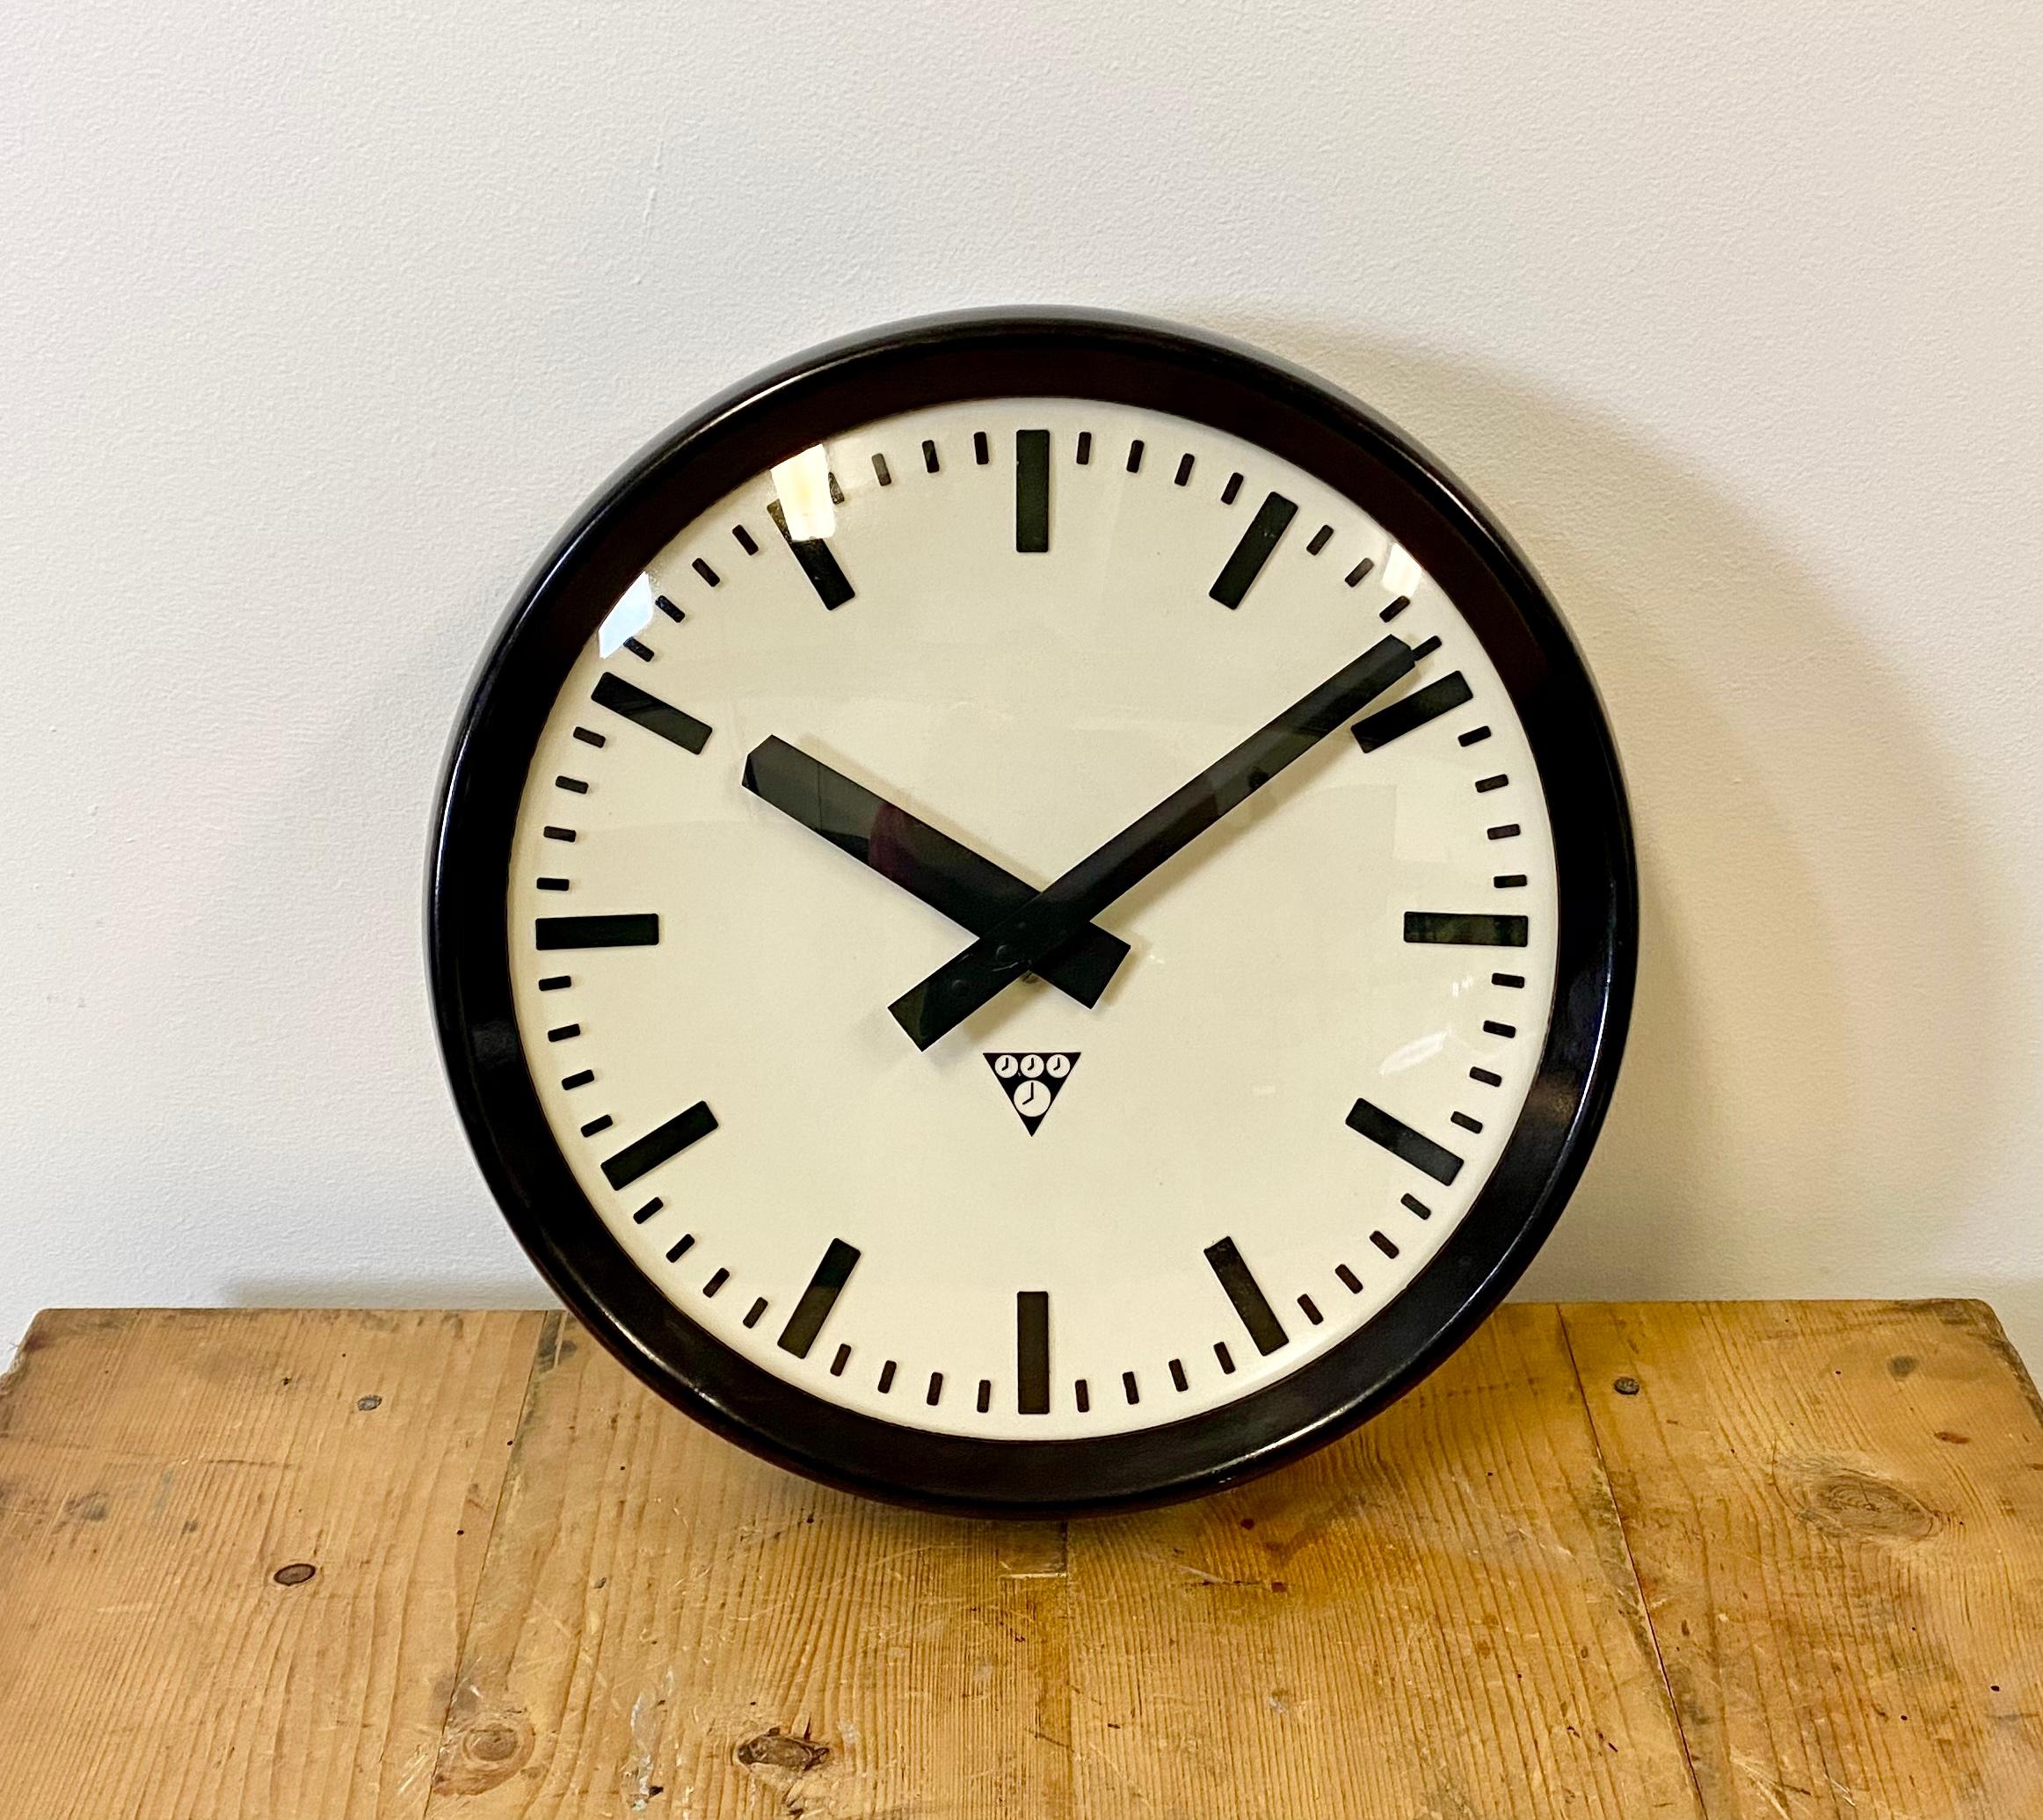 This wall clock was produced by Pragotron in former Czechoslovakia during the 1960s. The piece features a brown Bakelite frame, white Bakelite dial, aluminum hands and a curved clear glass cover. The piece has been converted into a battery-powered